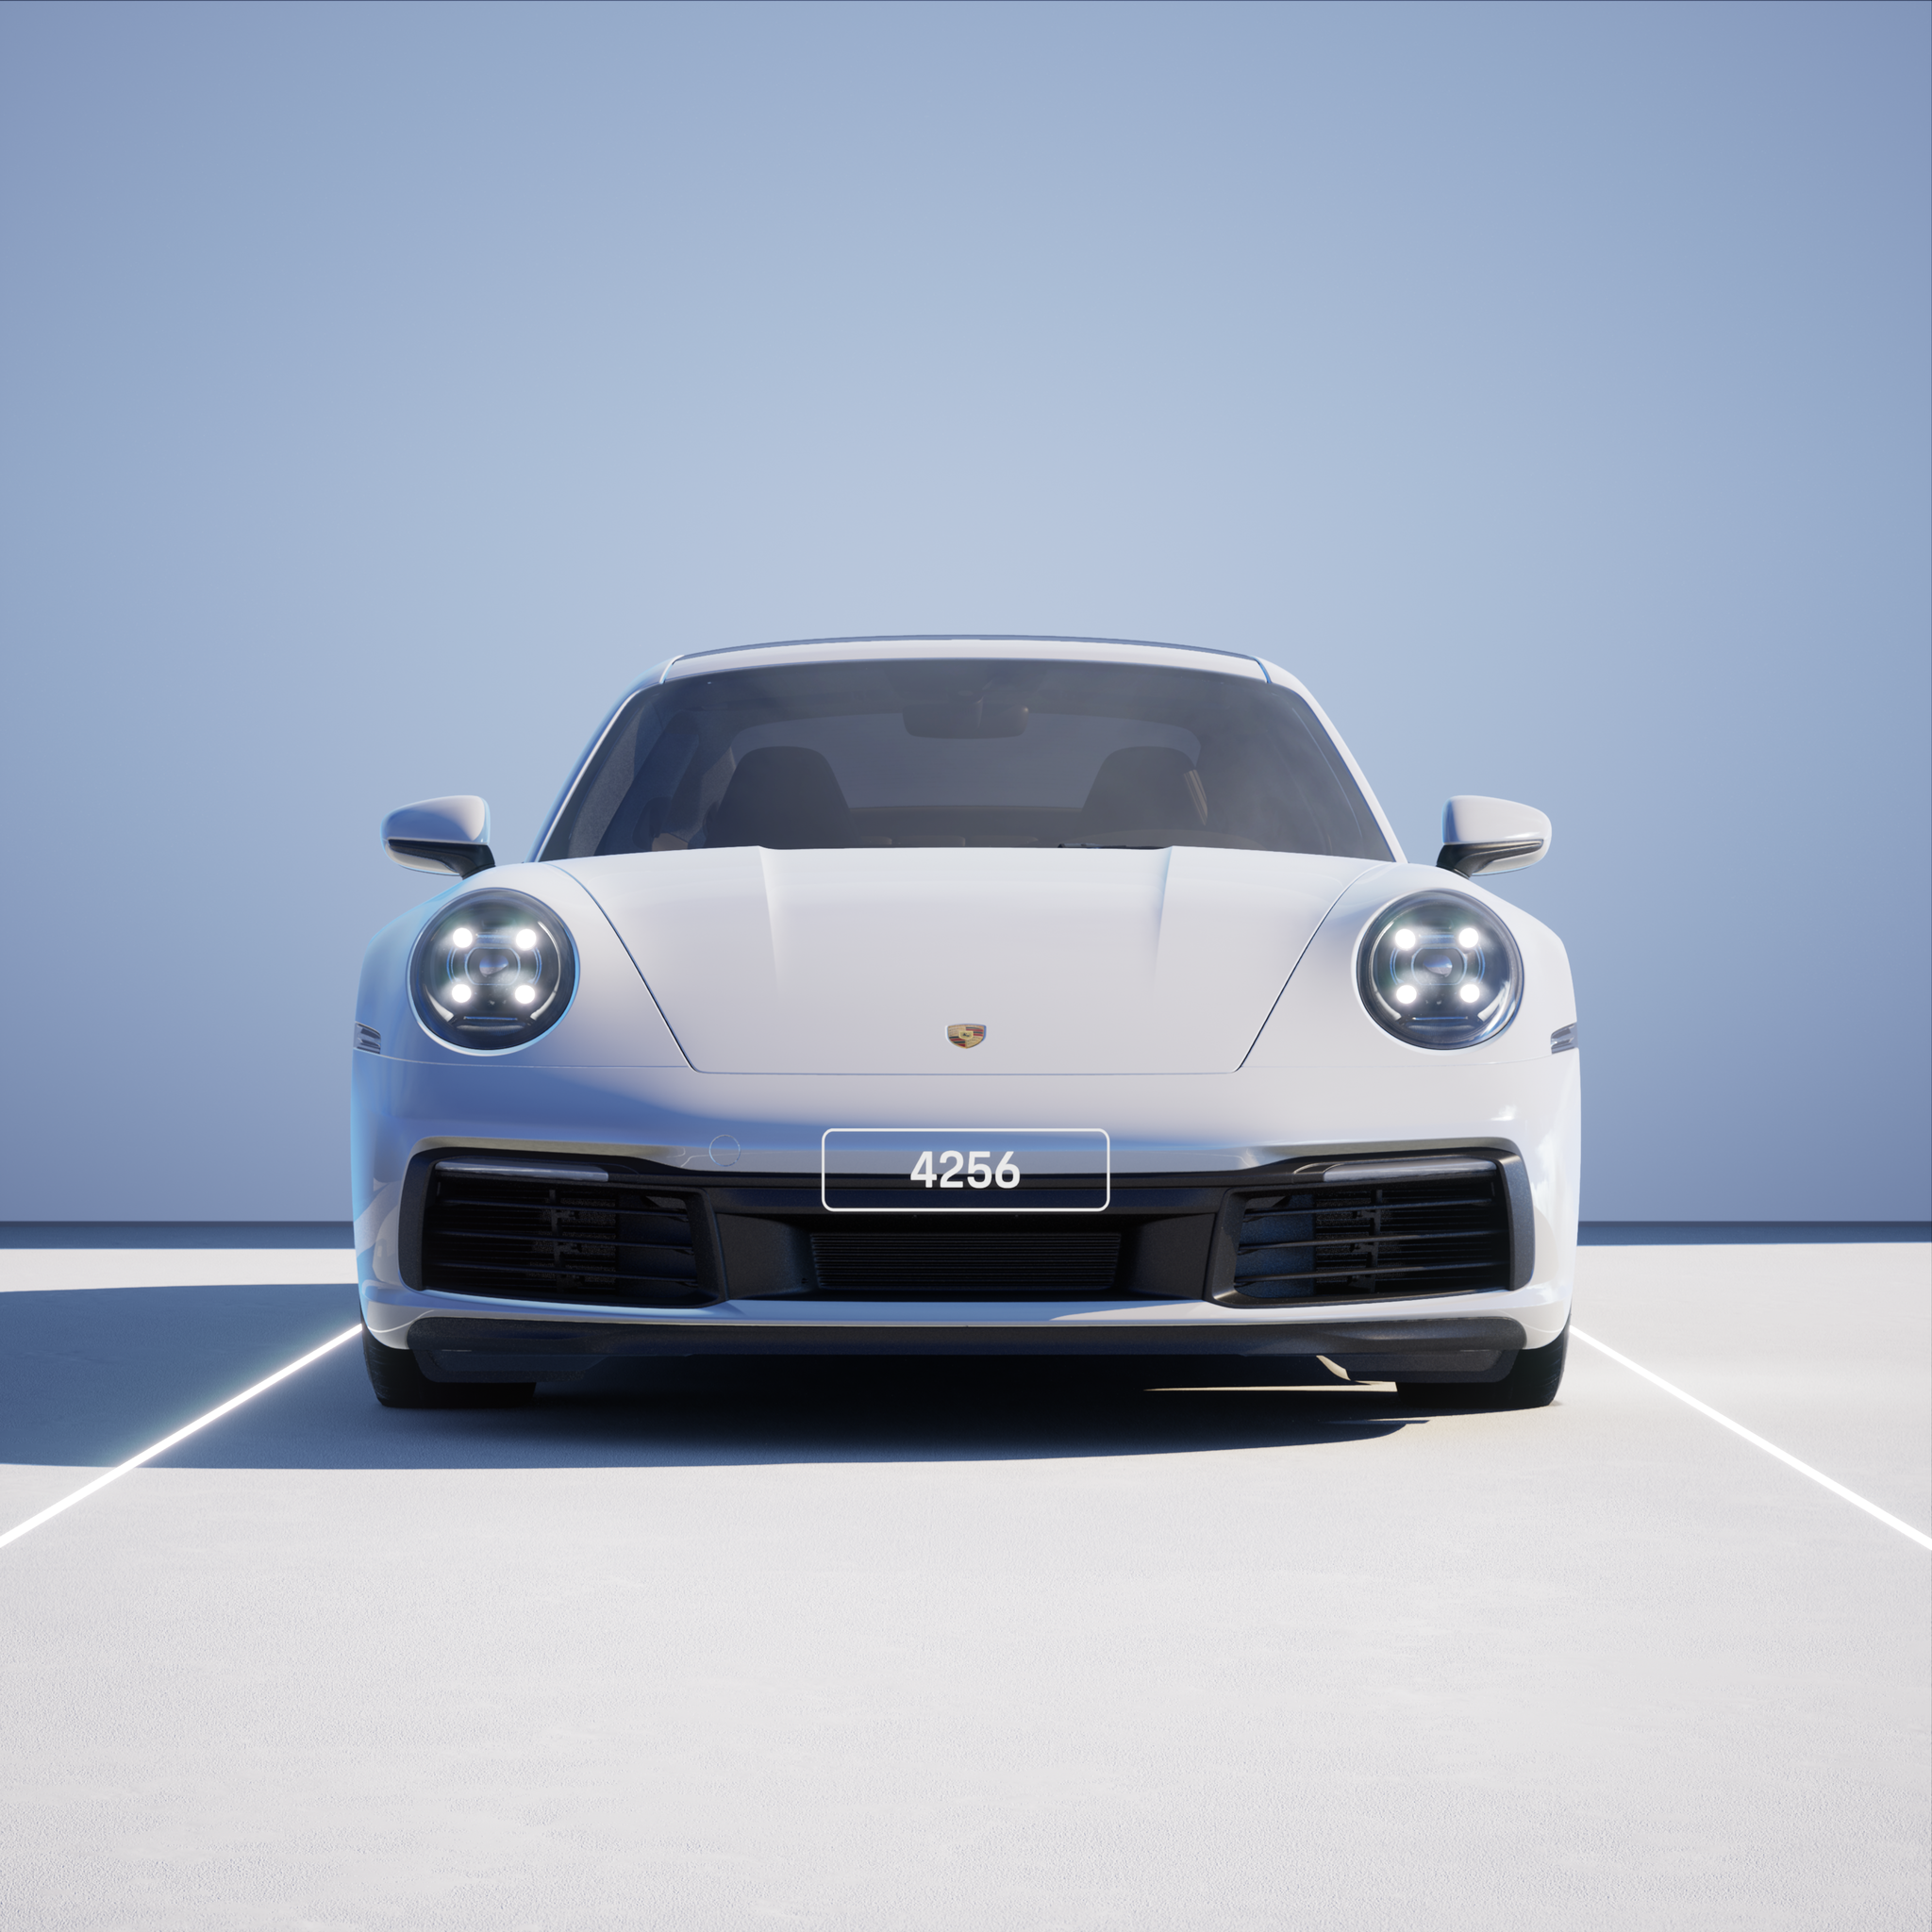 The PORSCHΞ 911 4256 image in phase